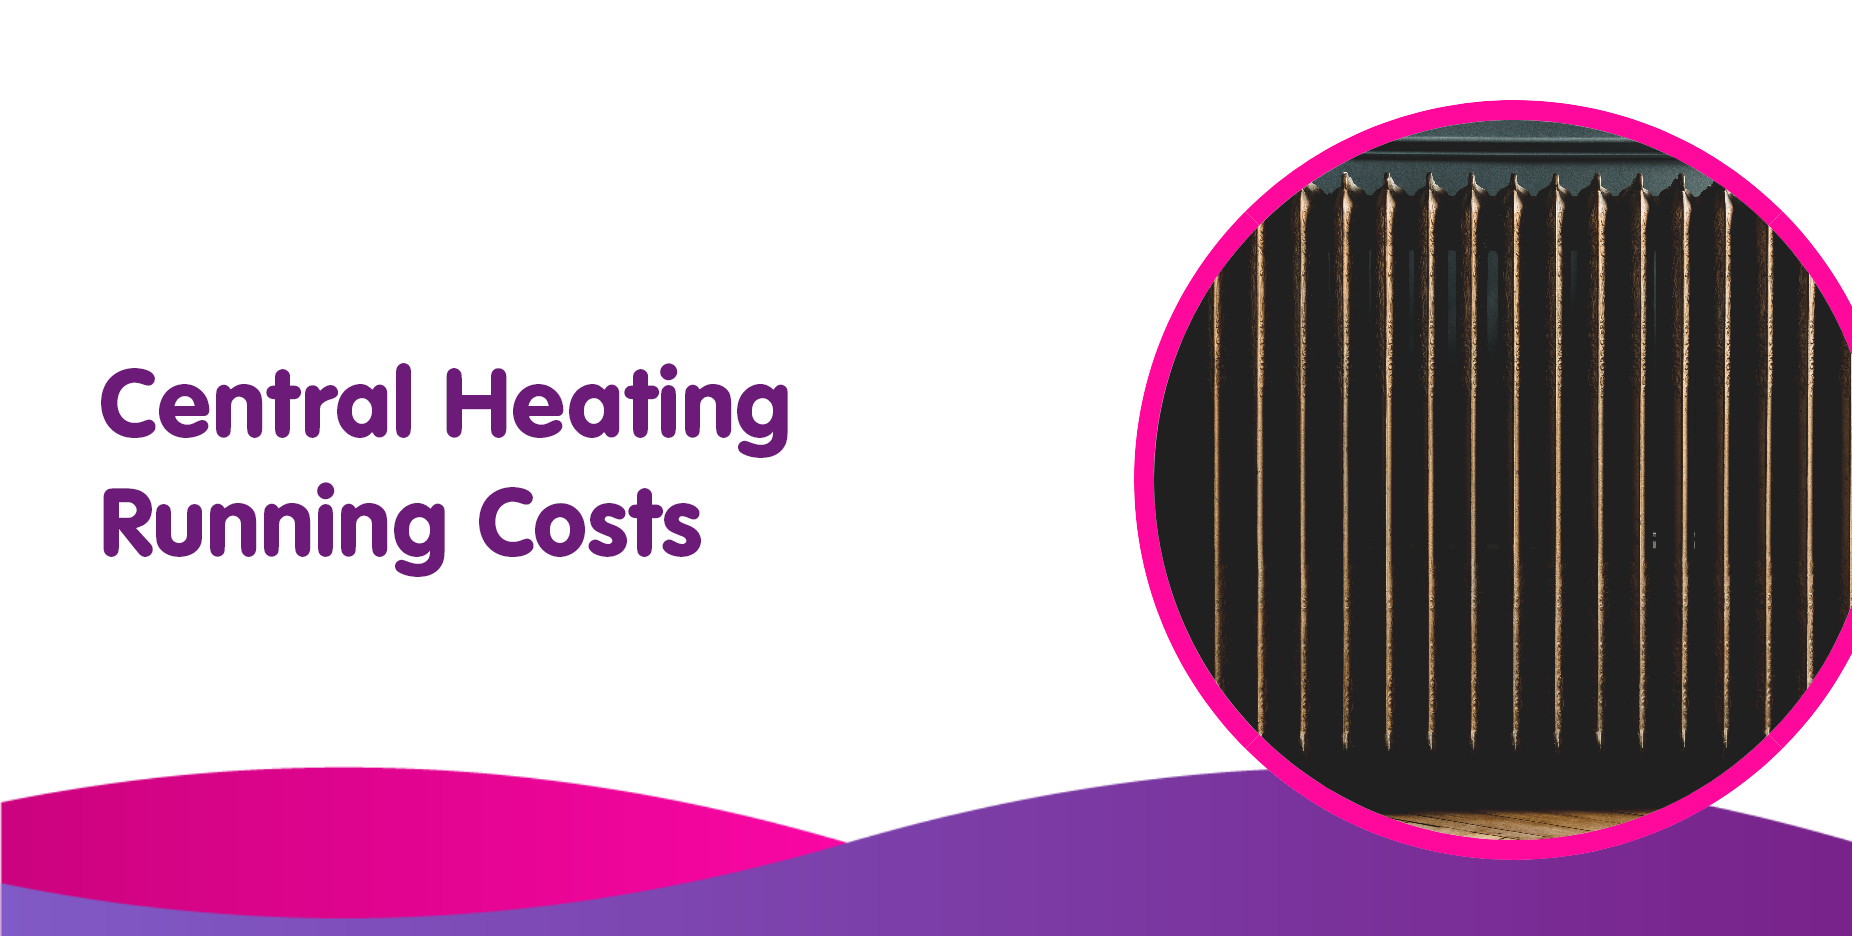 How Much Does It Cost To Run Central Heating Per Hour?